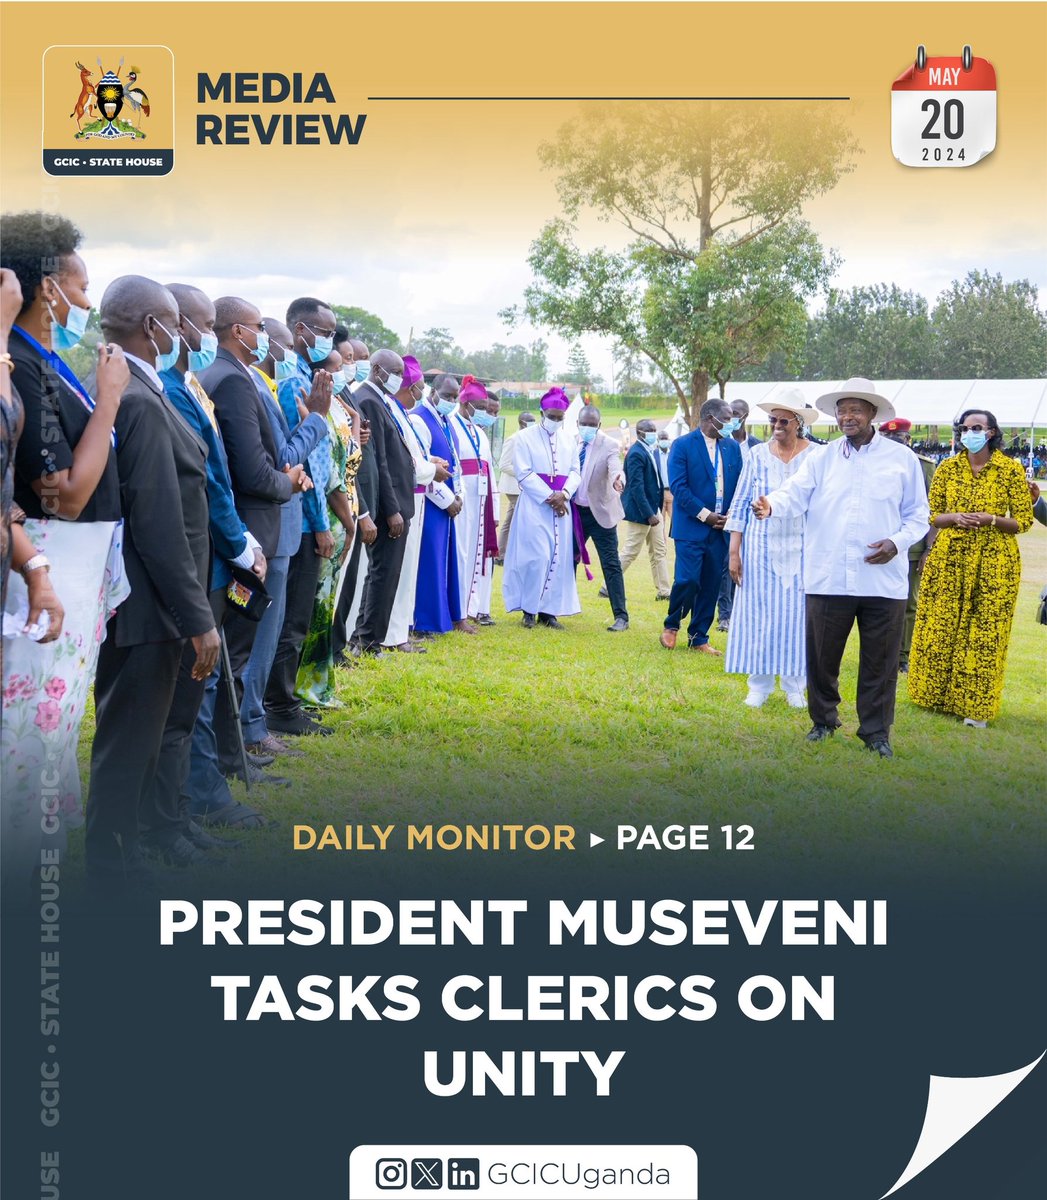 President Yoweri Museveni has asked religious leaders countrywide to resolve their differences and unite for the good of the faithful they lead. Link:media.gcic.go.ug/gcic-media-rev…